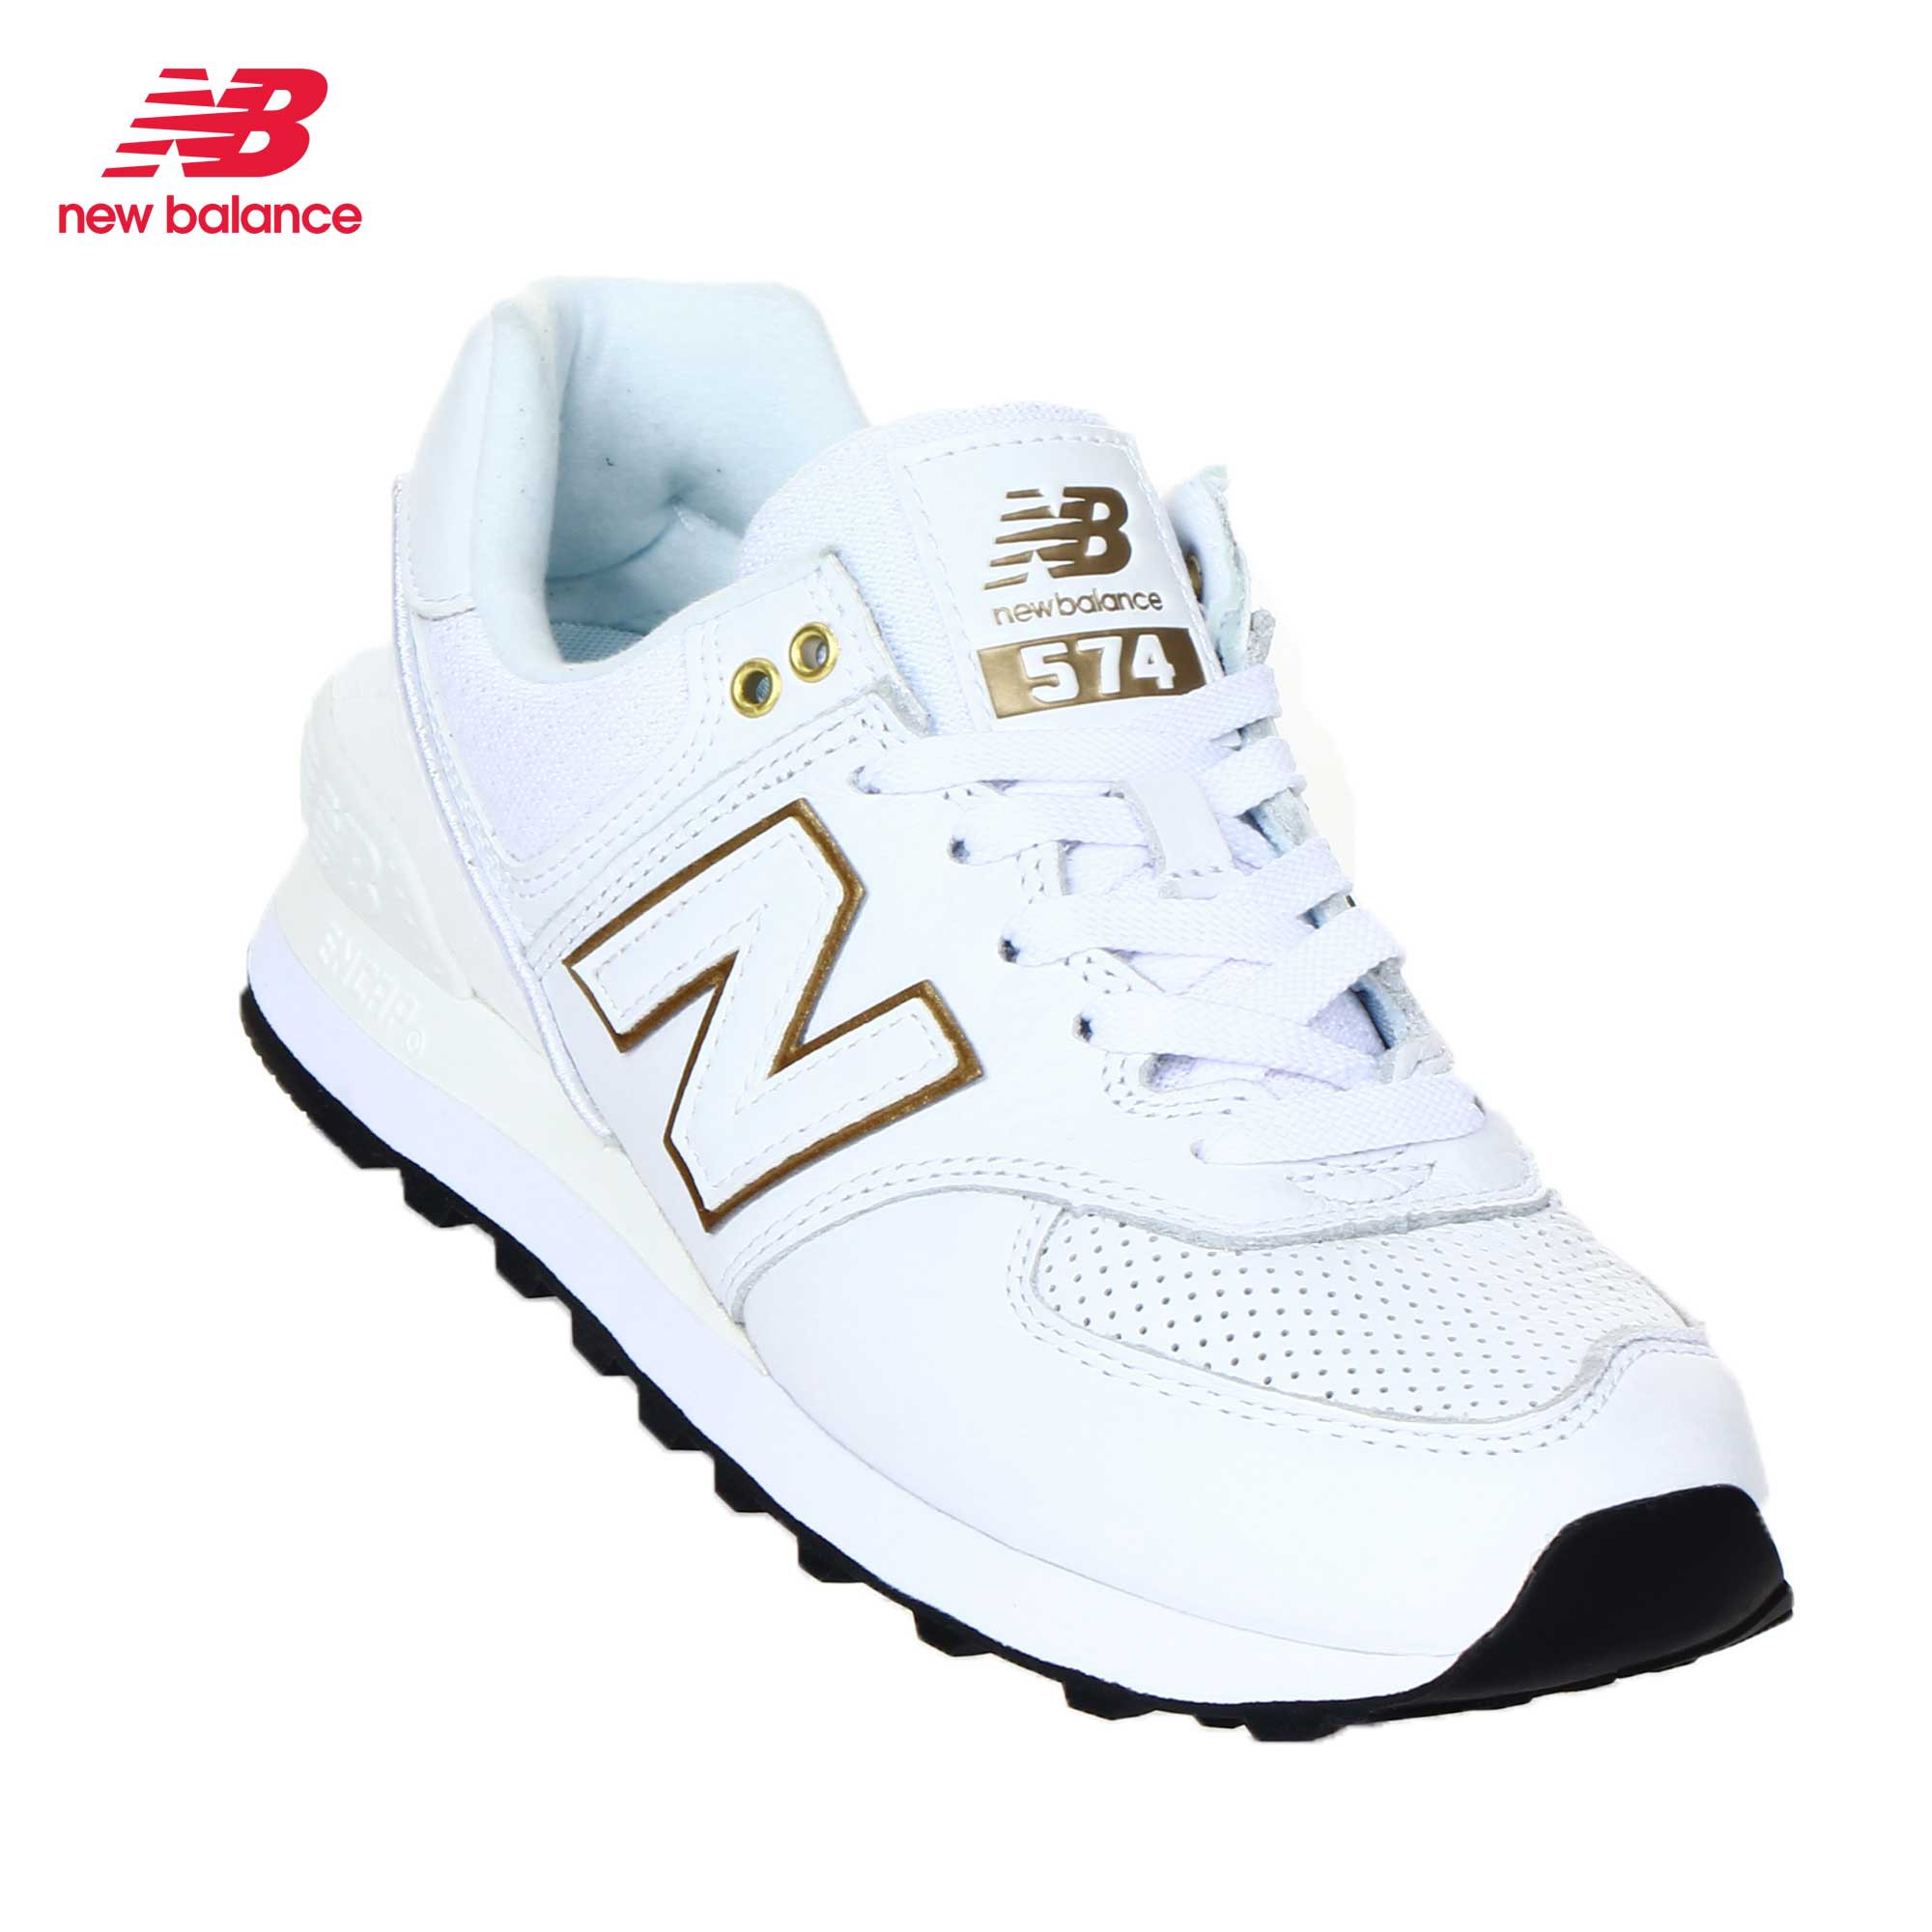 New Balance 574 Lifestyle Shoes for 